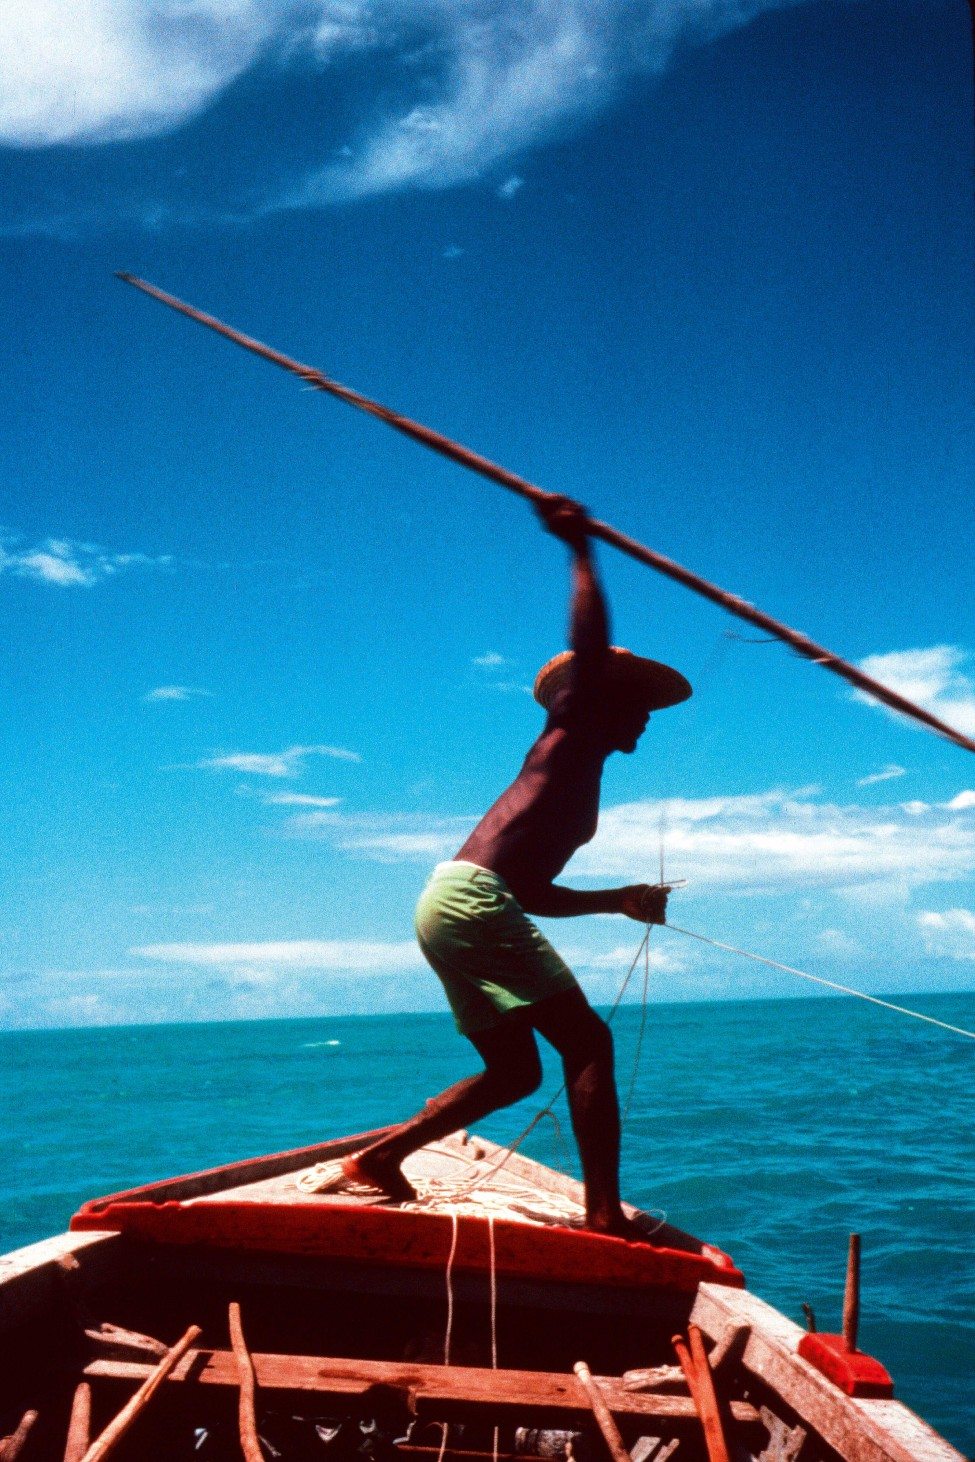 A turtle hunter aiming a harpoon at an adult green turtle at Cosmoledo Atoll in 1982. The harpoon head, which is attached to a cord held by the hunter, will enter the turtle's carapace and dislodge from the ‘baton’. The hunter will then reel in the turtle by the cord.<br />
Photo by Jeanne Mortimer